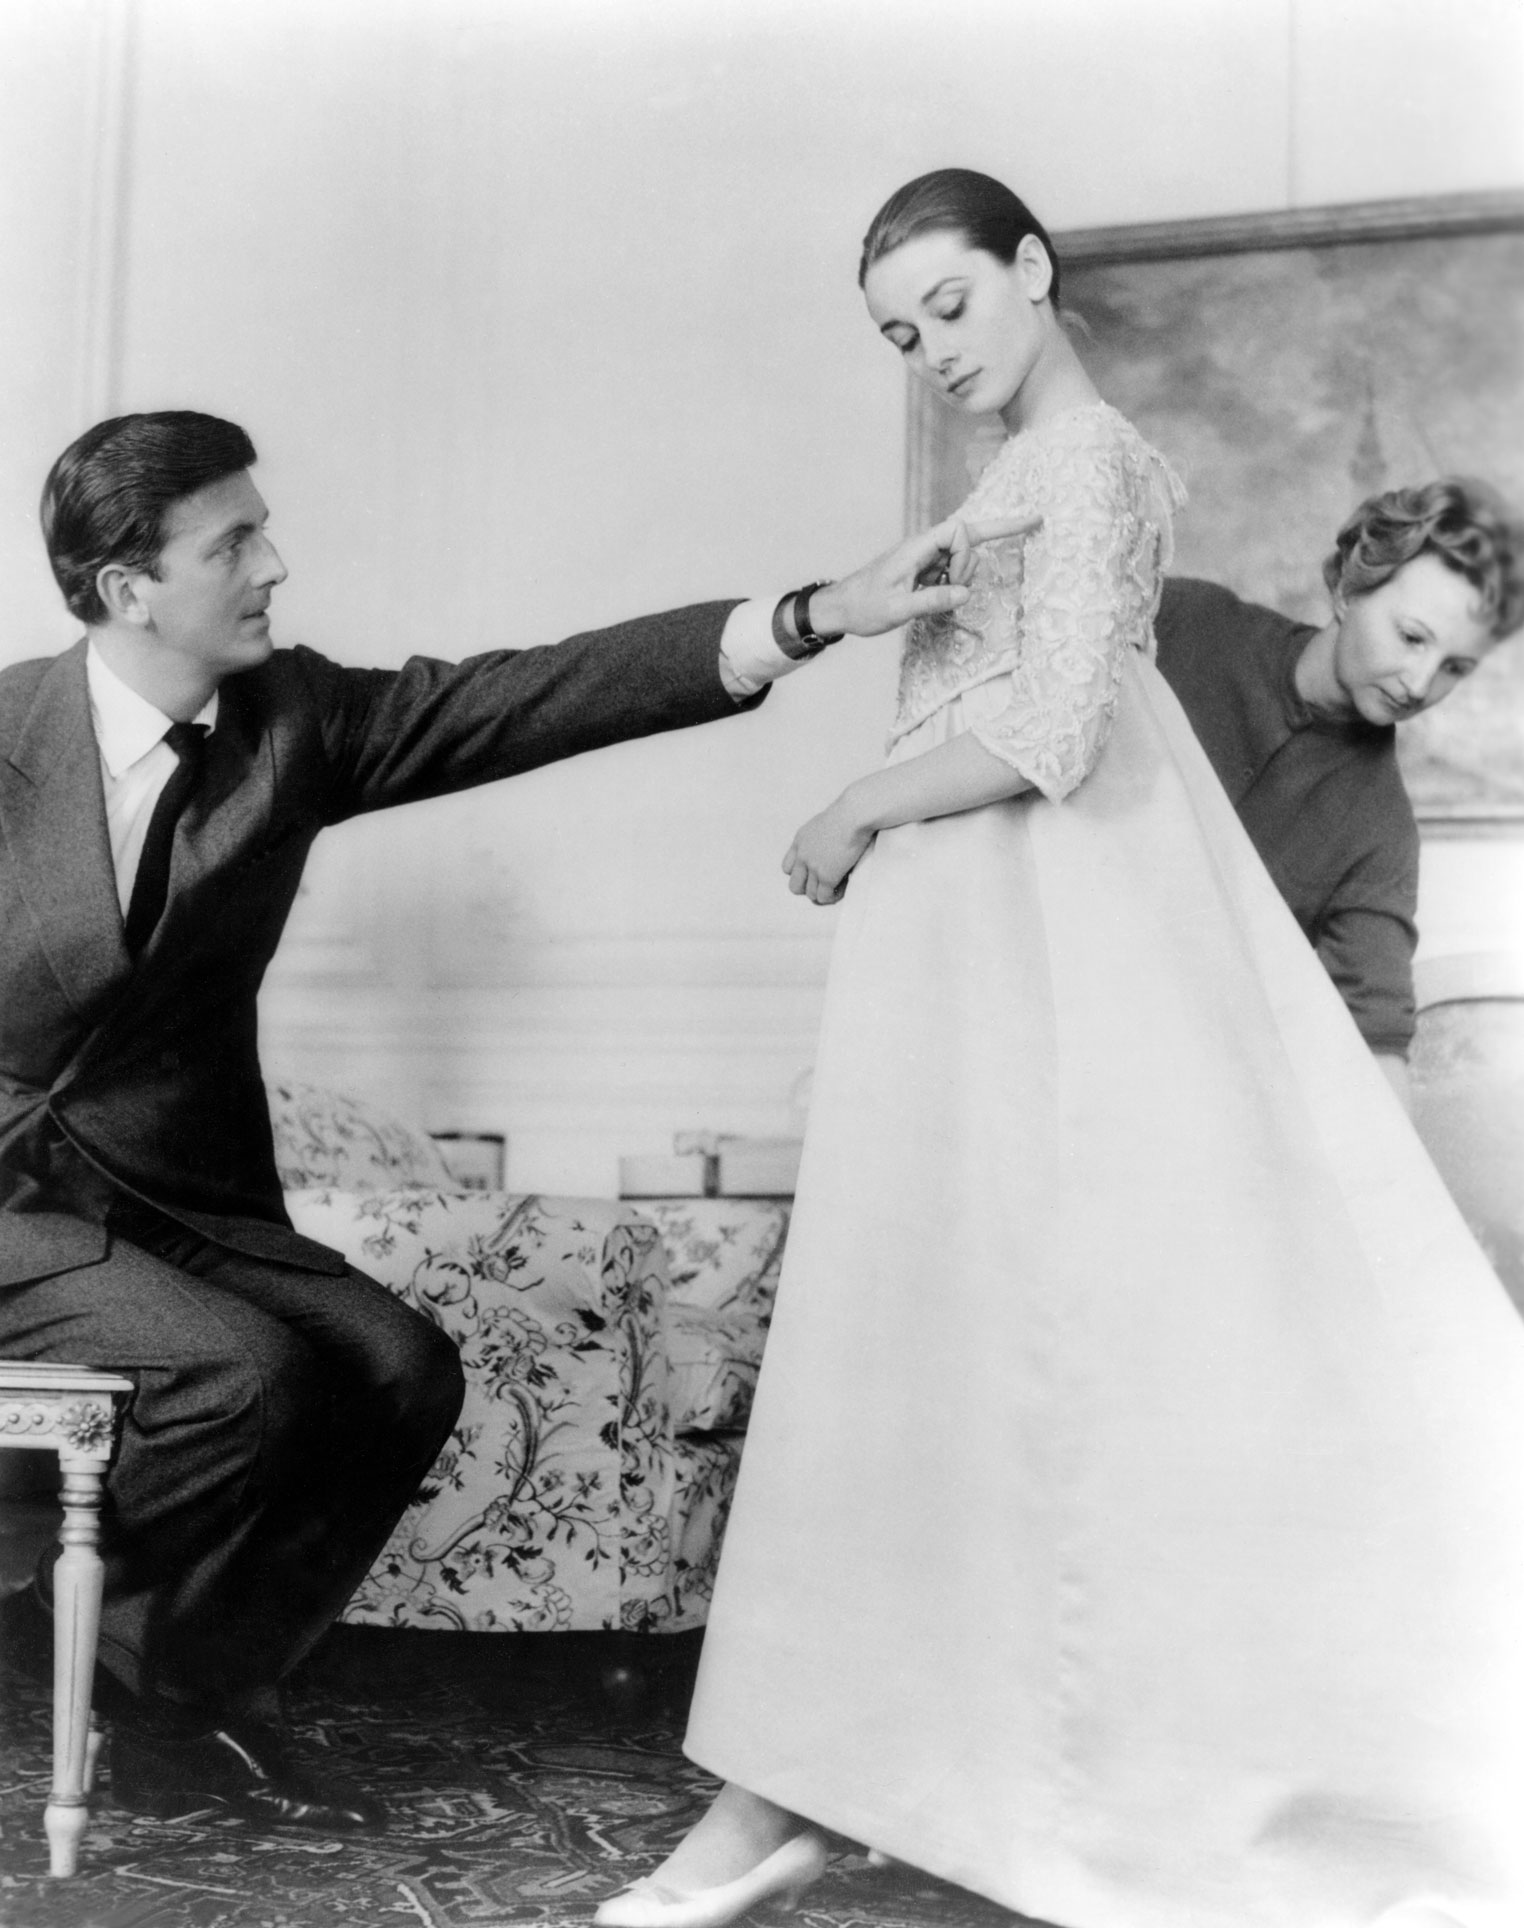 5 fascinating facts you didn't know about Hubert de Givenchy